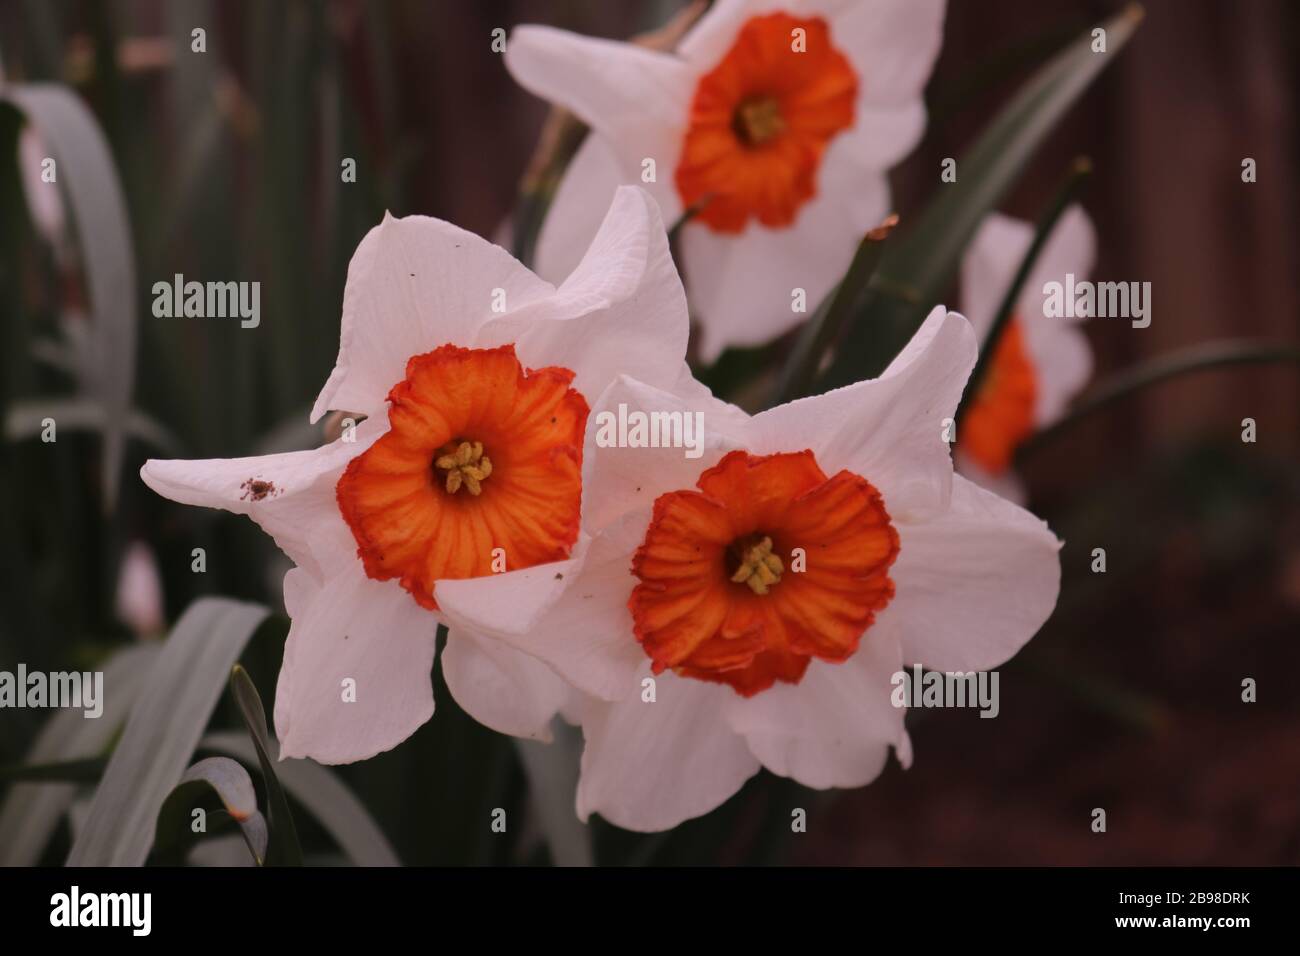 A closeup of white with an orange center daffodil Stock Photo